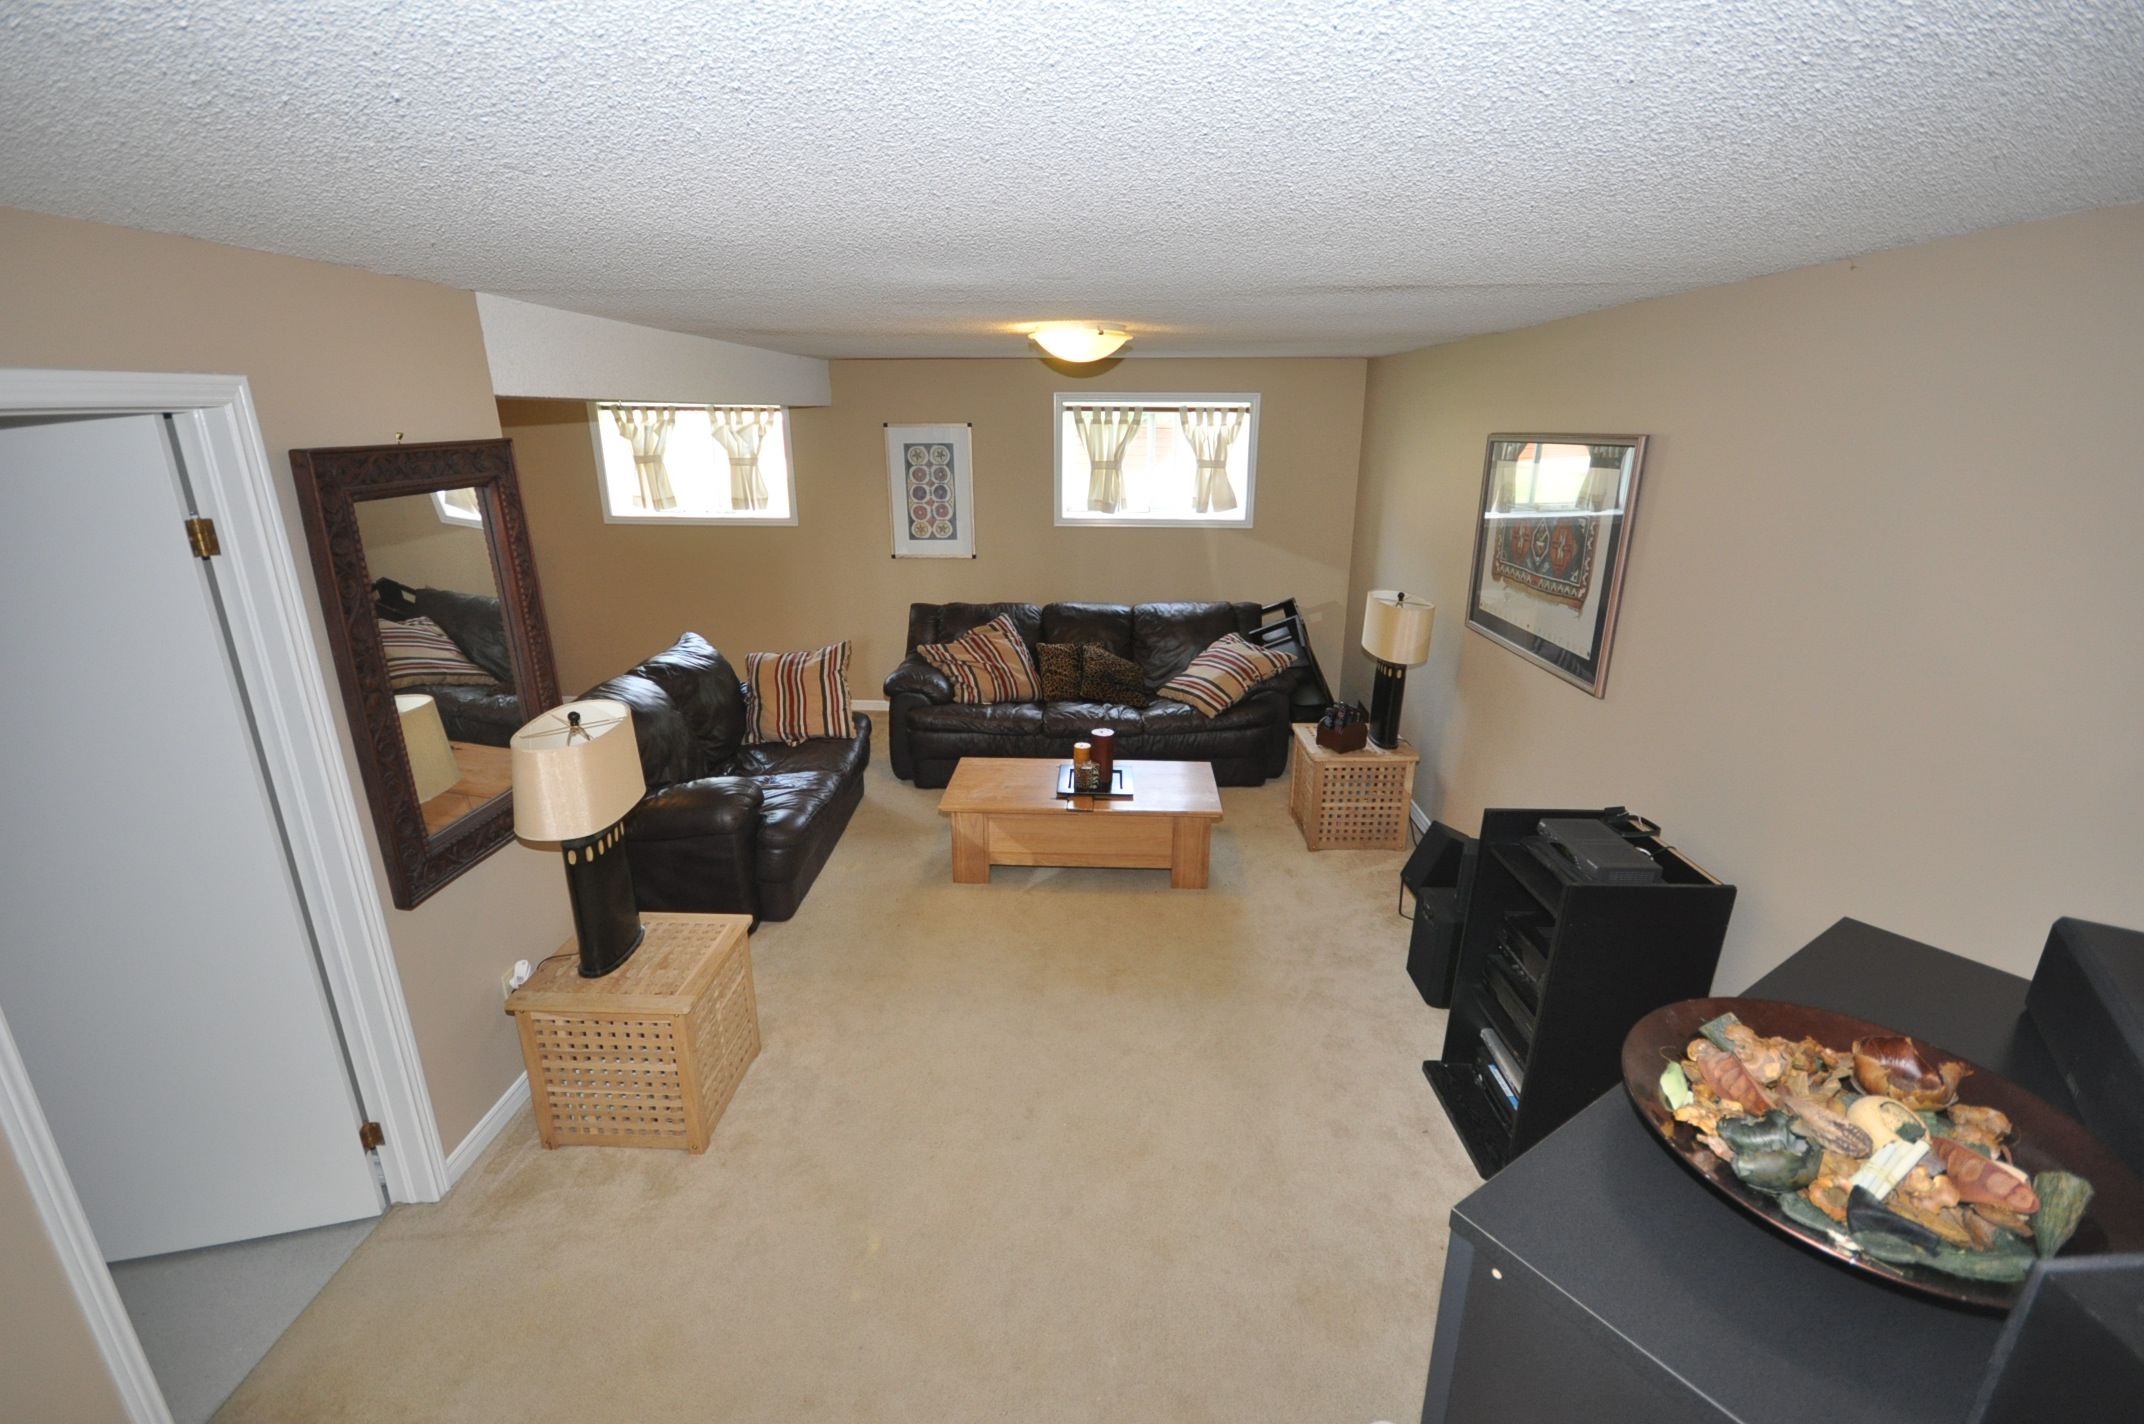 Lots of room for entertaining in the full sized family room